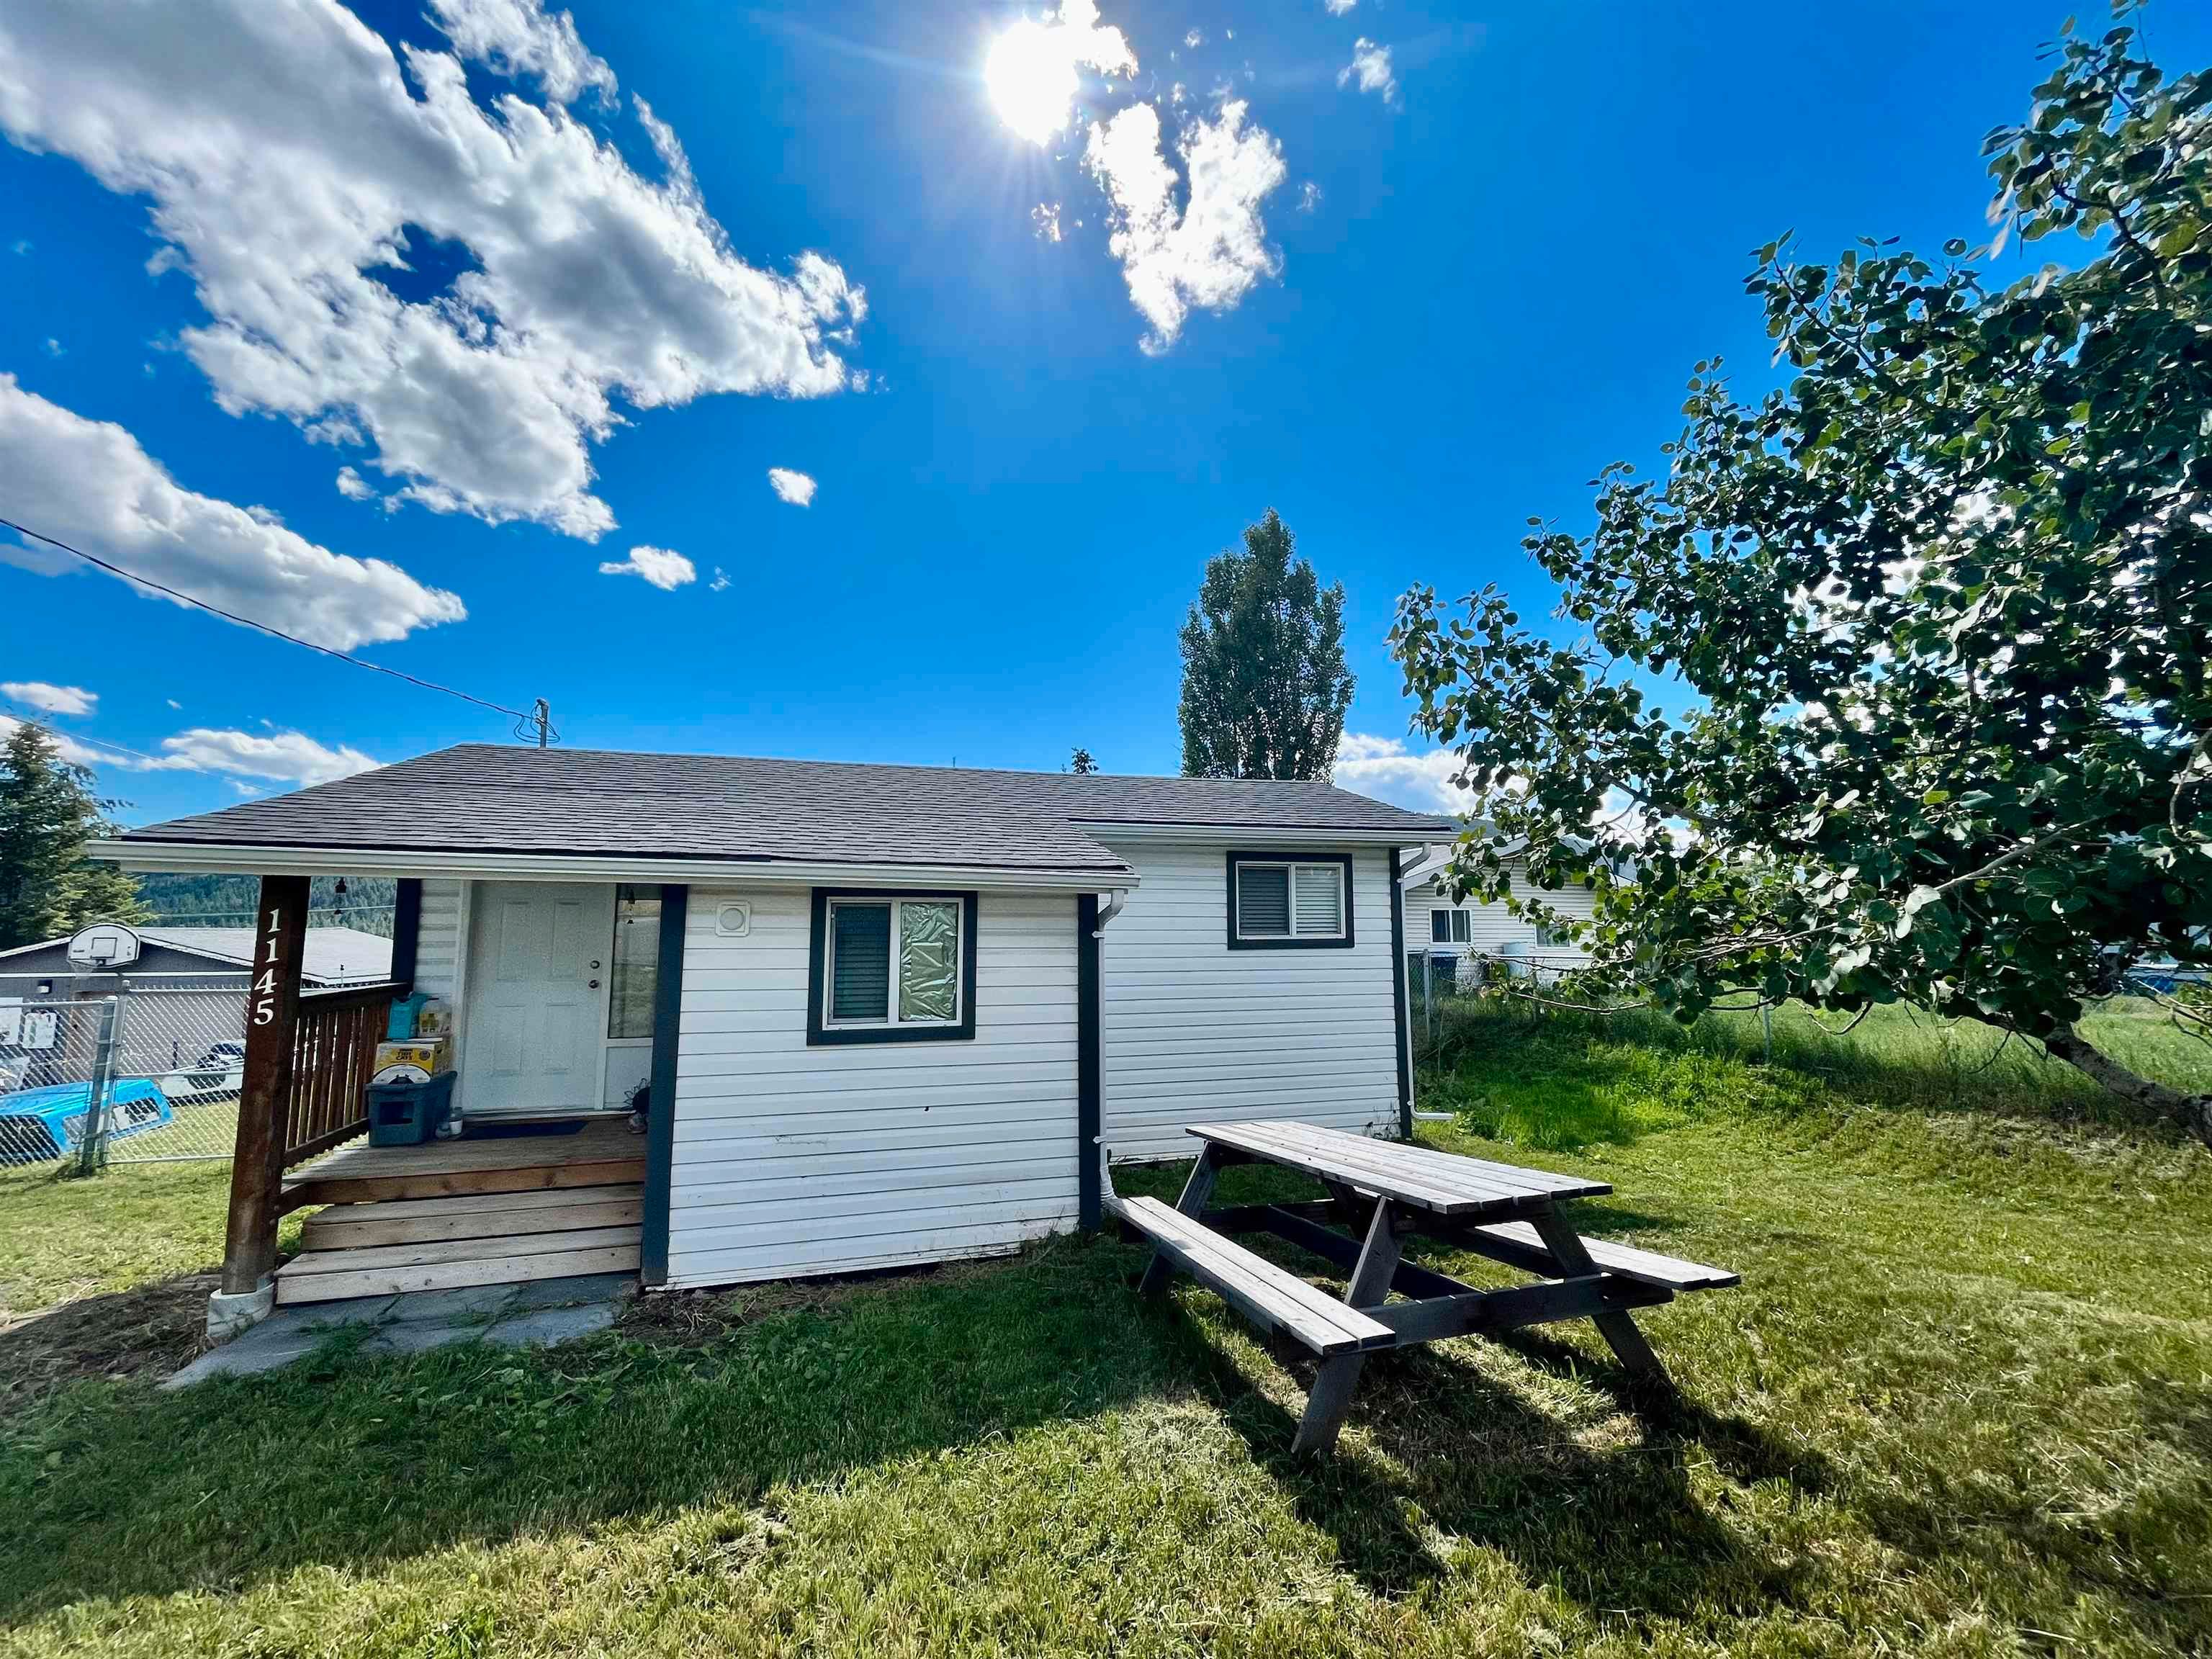 New property listed in Williams Lake - City, Williams Lake